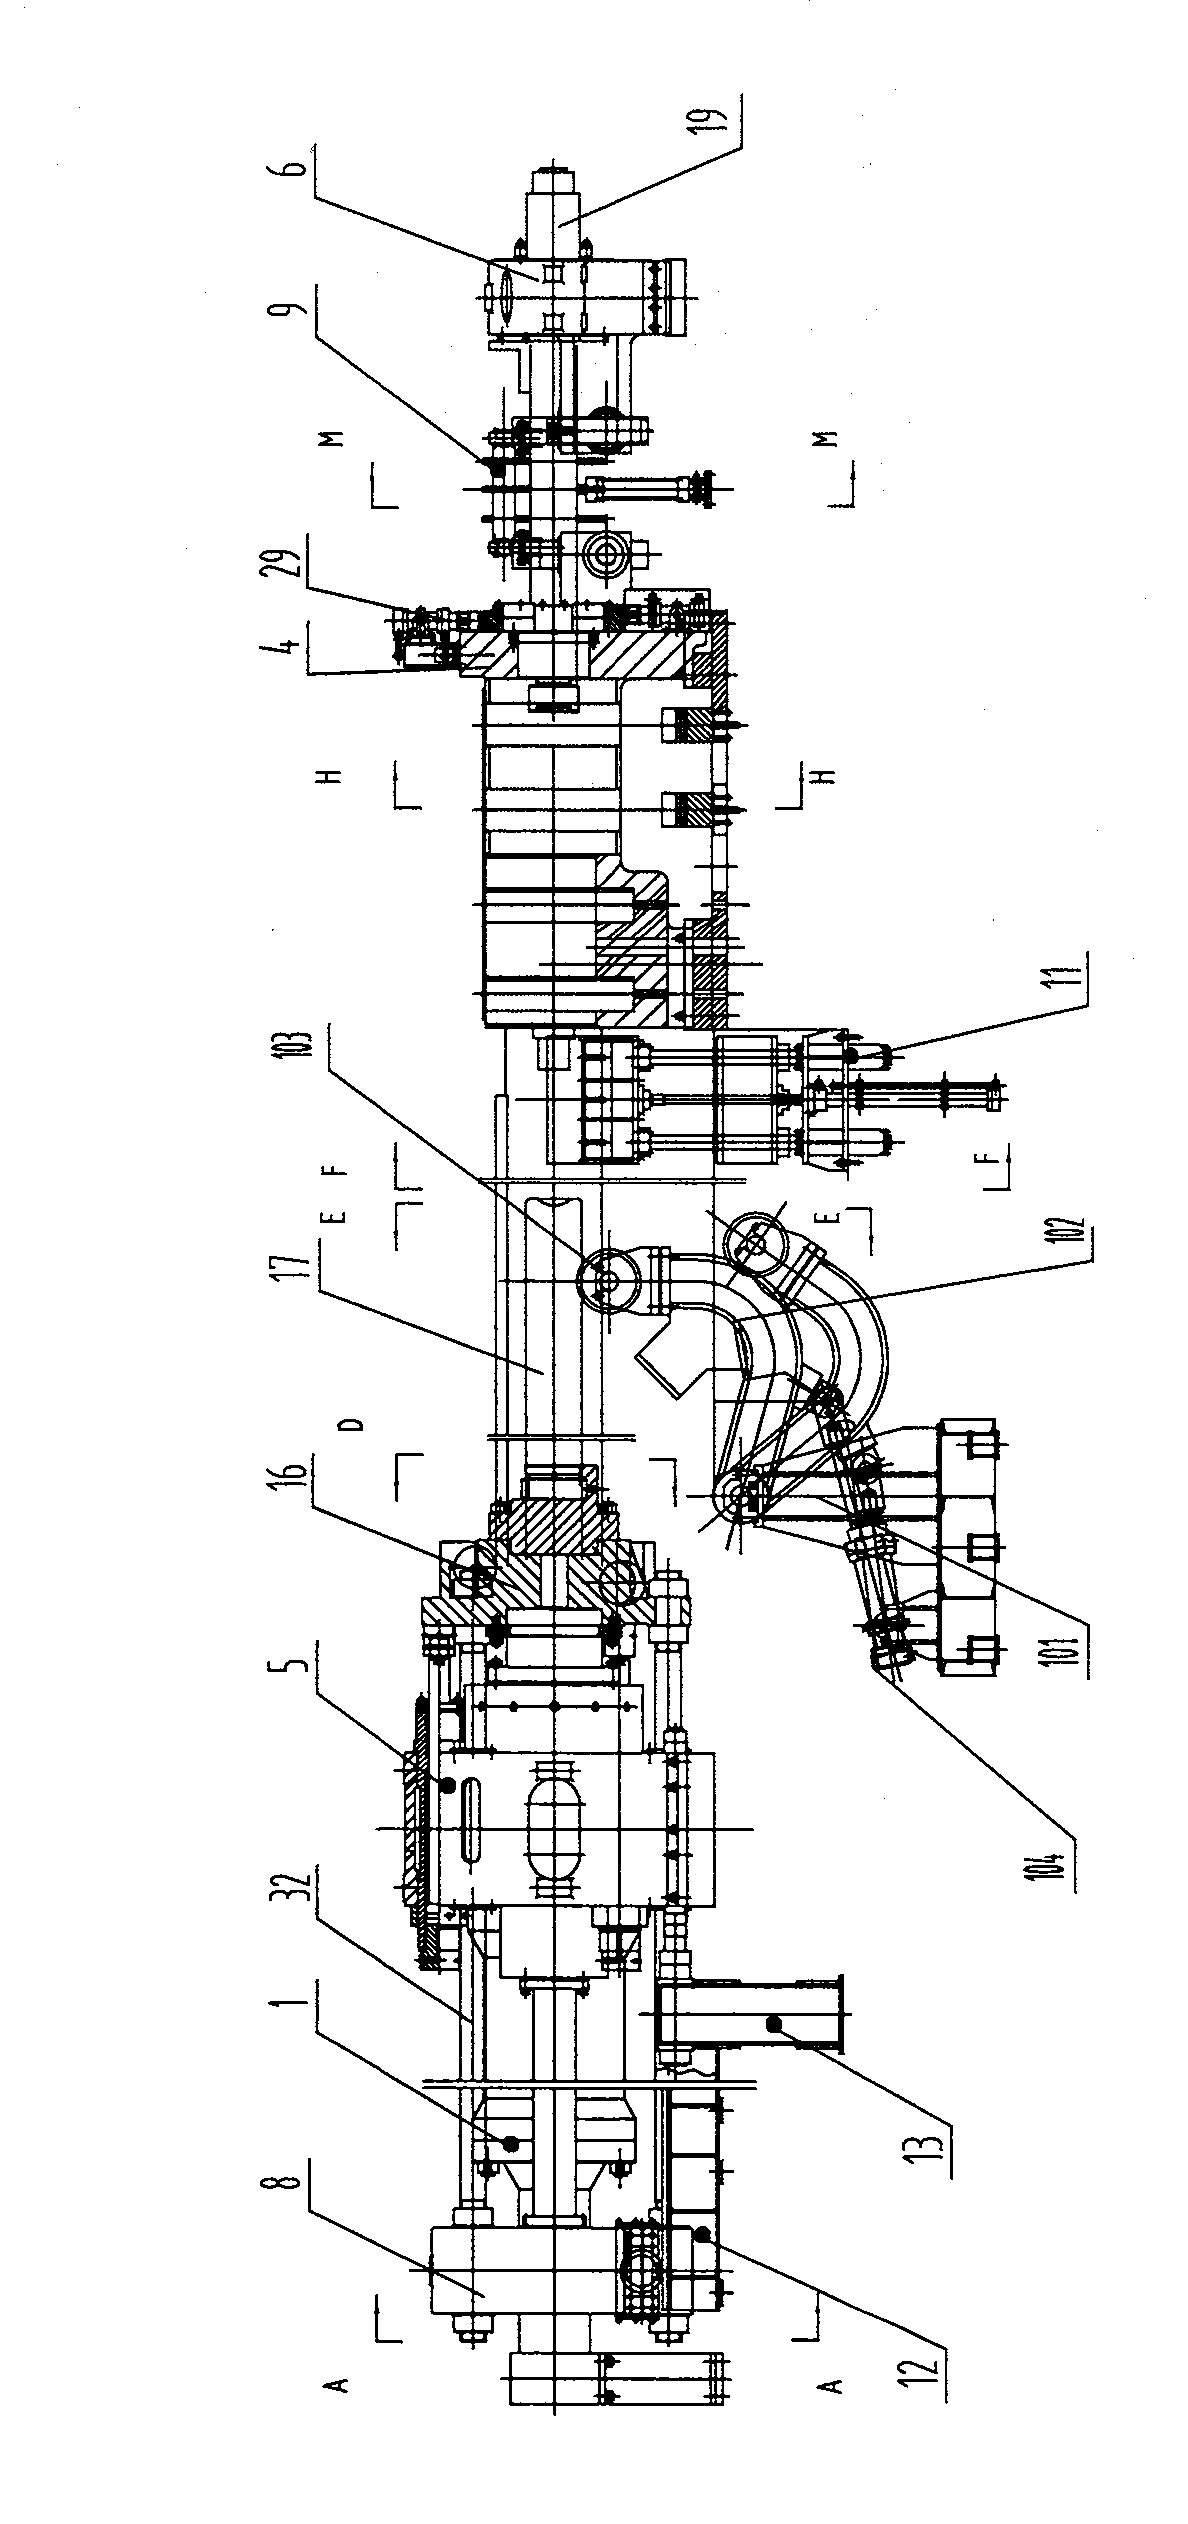 Horizontal hydraulic machine for drawing and extending